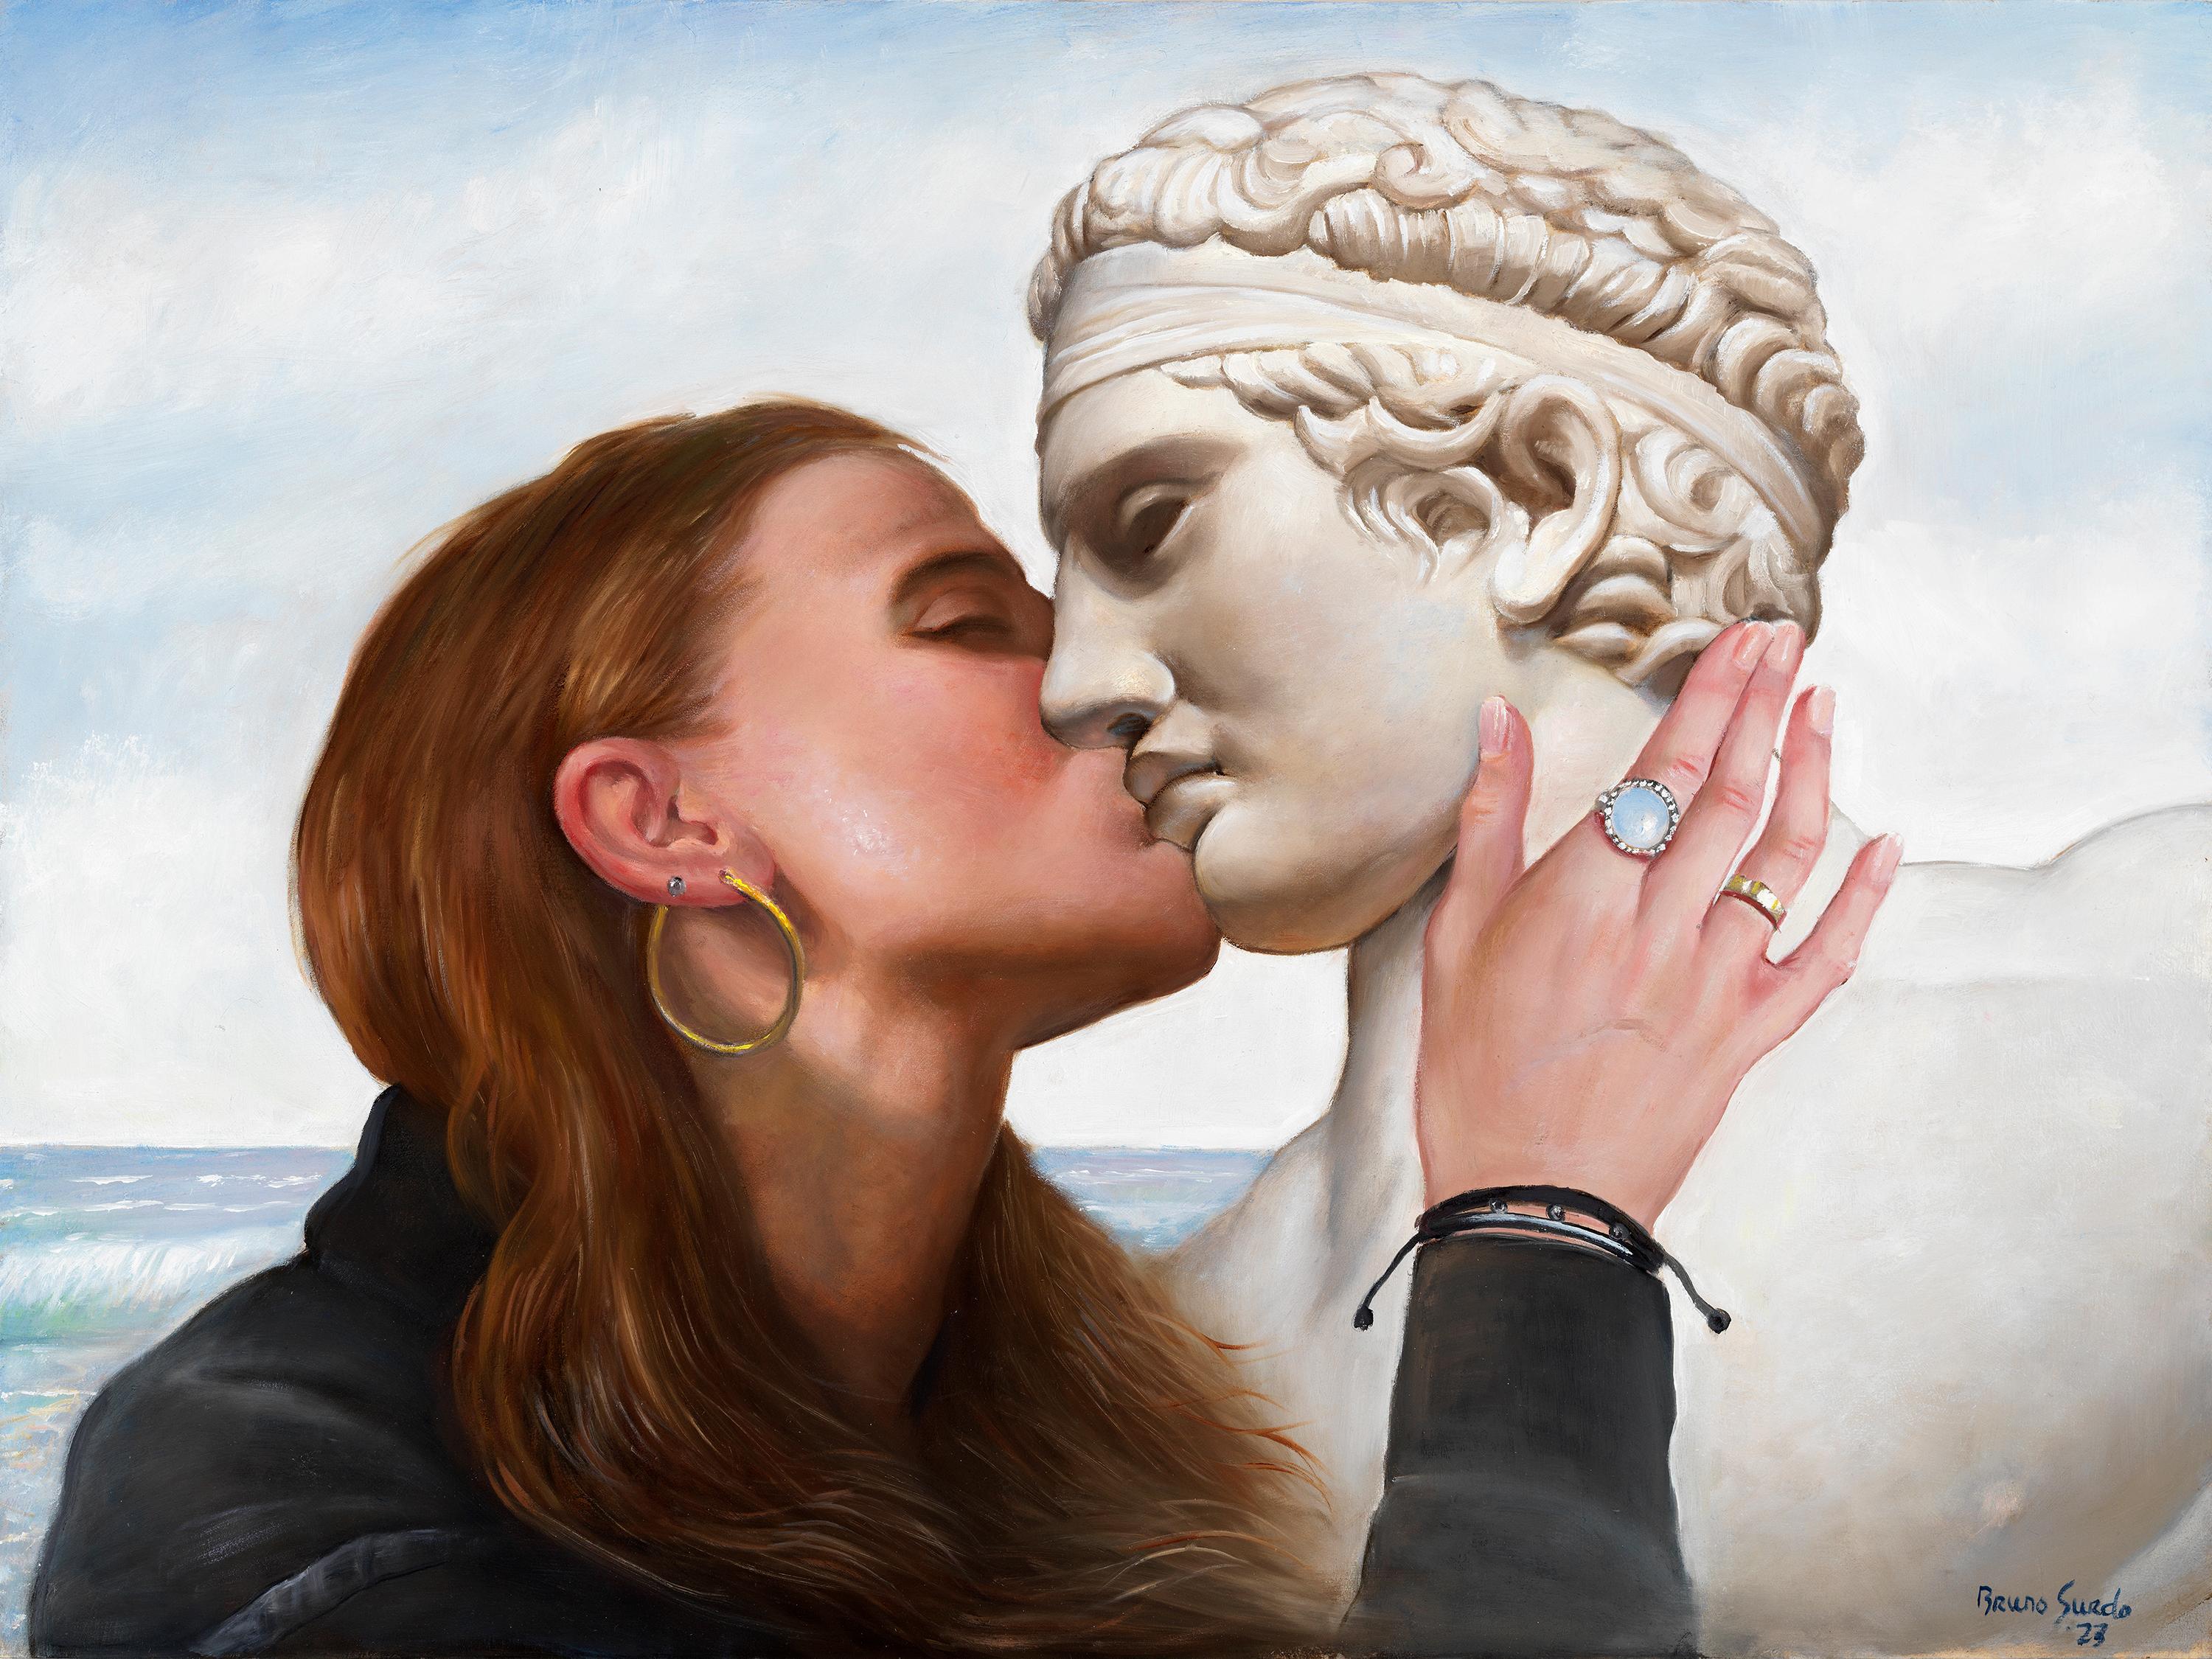 Bruno Surdo Figurative Painting - Beauty's Kiss - Woman Kissing a Statue of a Greek Warrior, Original Oil Painting